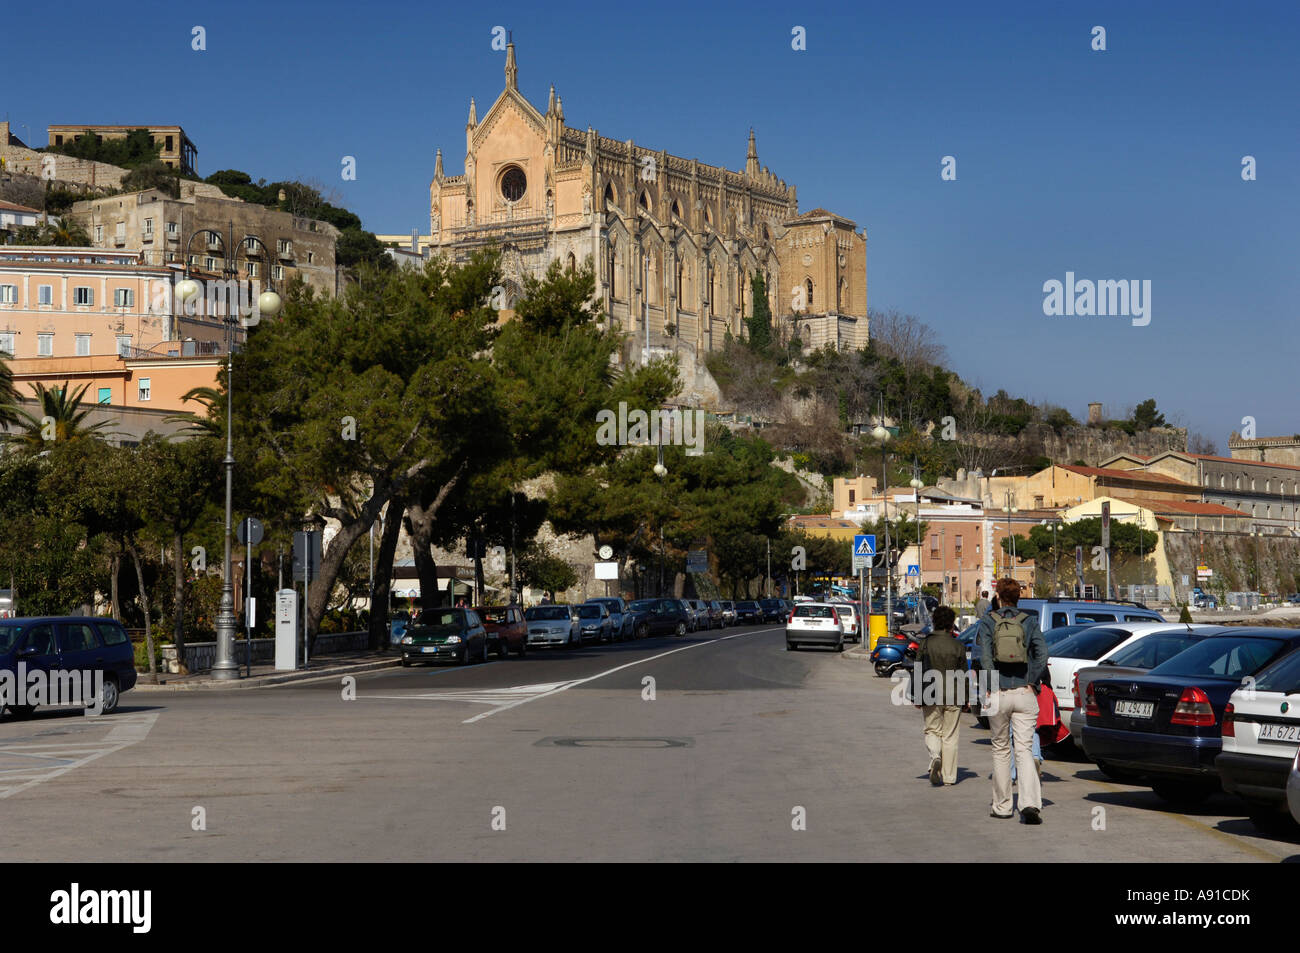 Old part of the town Gaeta in Italy Stock Photo